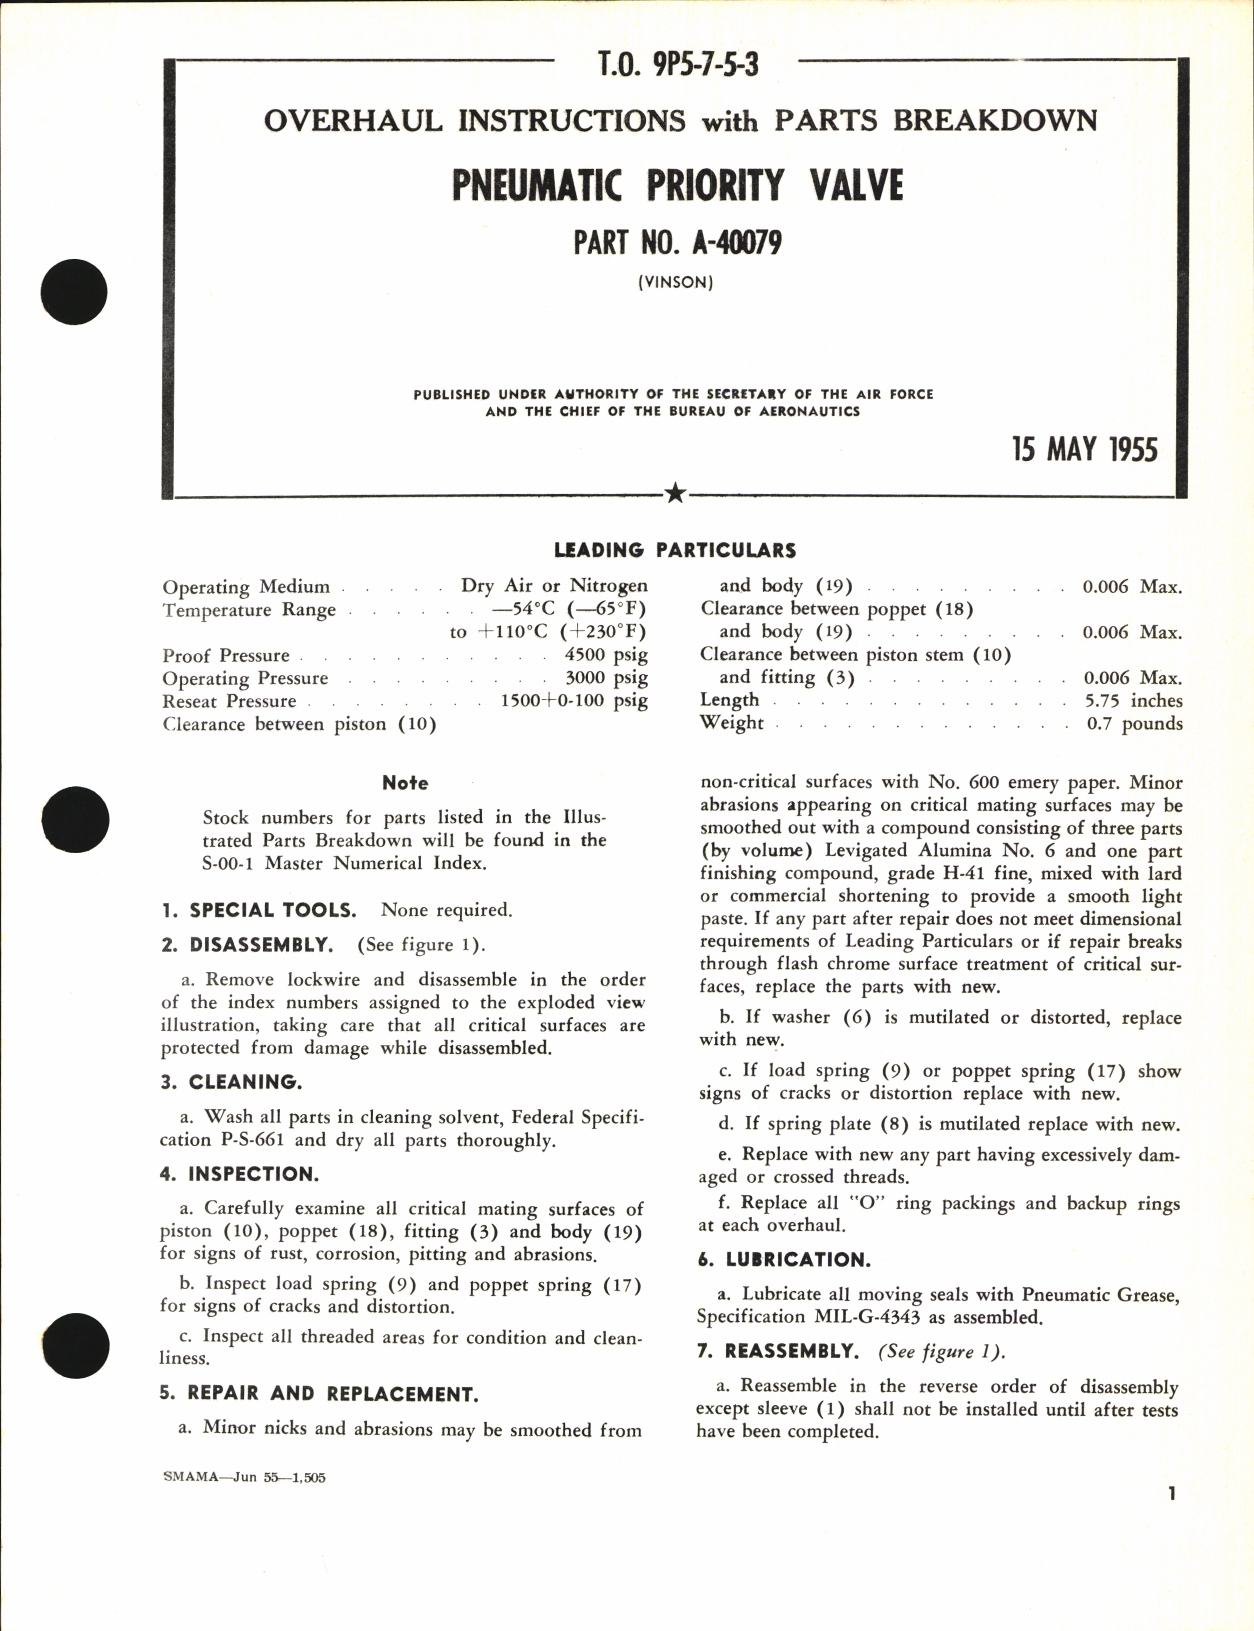 Sample page 1 from AirCorps Library document: Overhaul Instructions with Parts Breakdown for Pneumatic Priority Valve Part No. A-40079